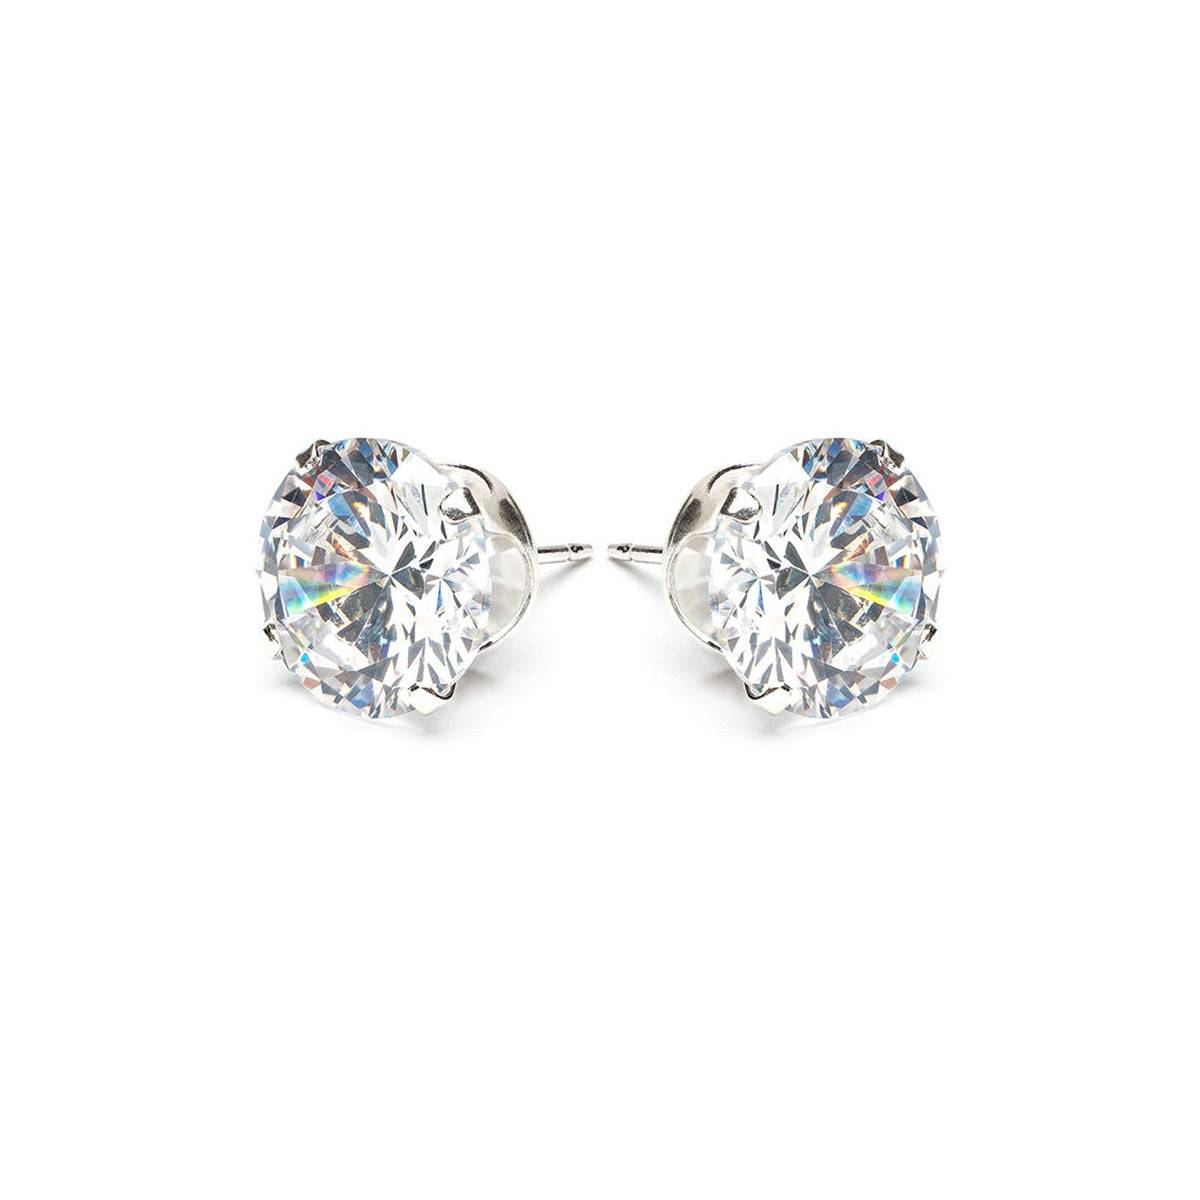 Sterling Silver 10 mm Round Cubic Zirconia Stud Earrings - Simply Whispers